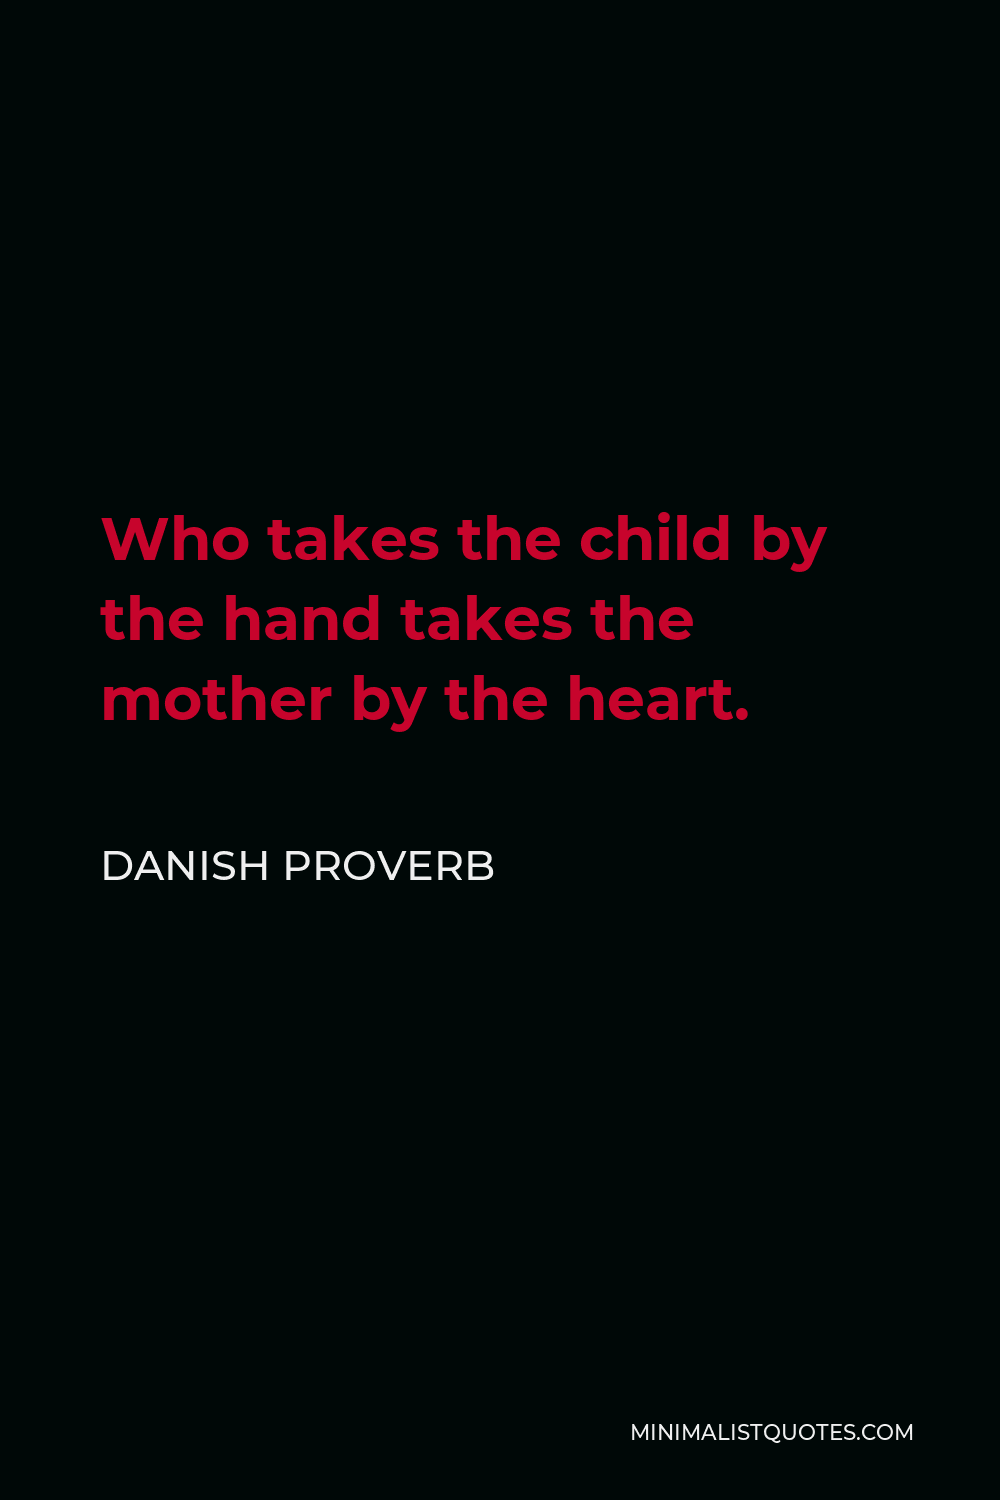 Danish Proverb Quote - Who takes the child by the hand takes the mother by the heart.